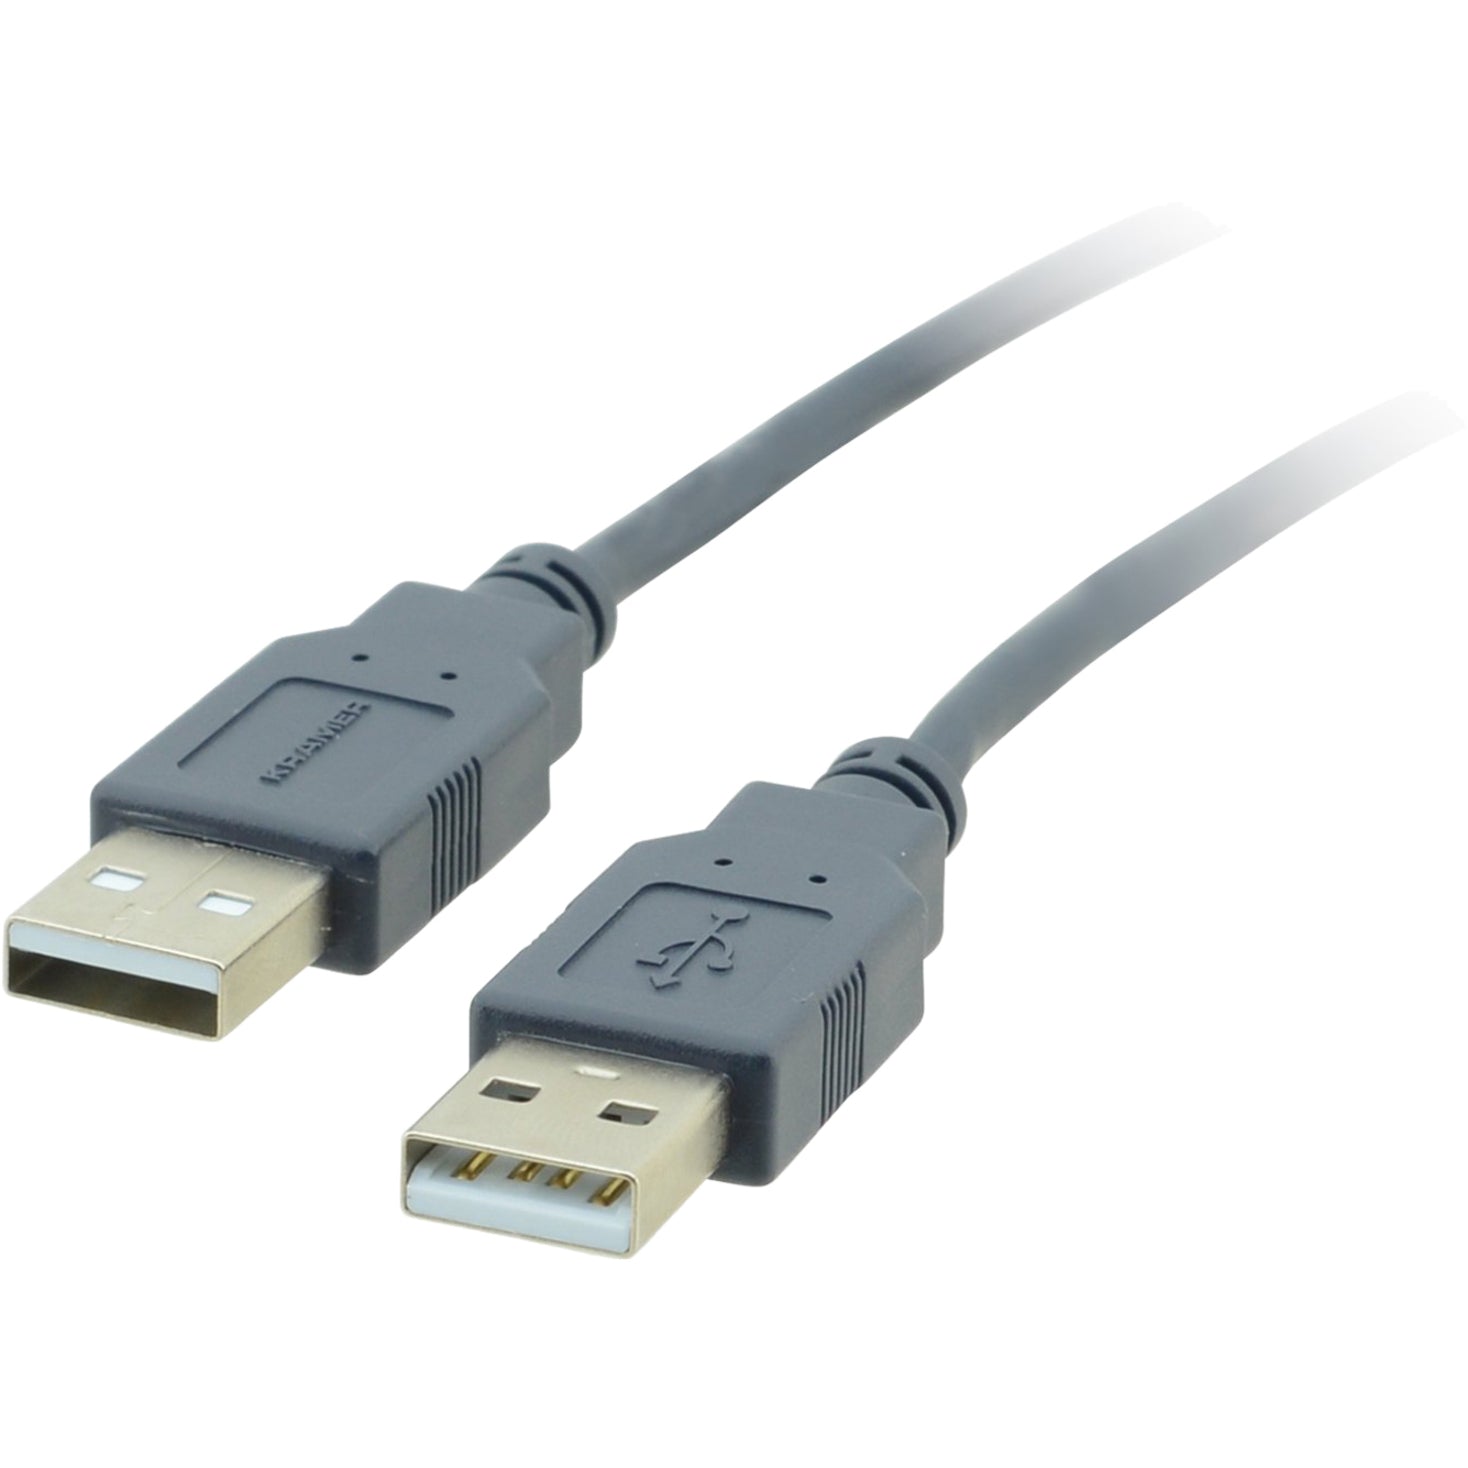 Kramer 96-0212006 USB 2.0 A to A Cable, 6ft / 1.8m, High-Speed Data Transfer